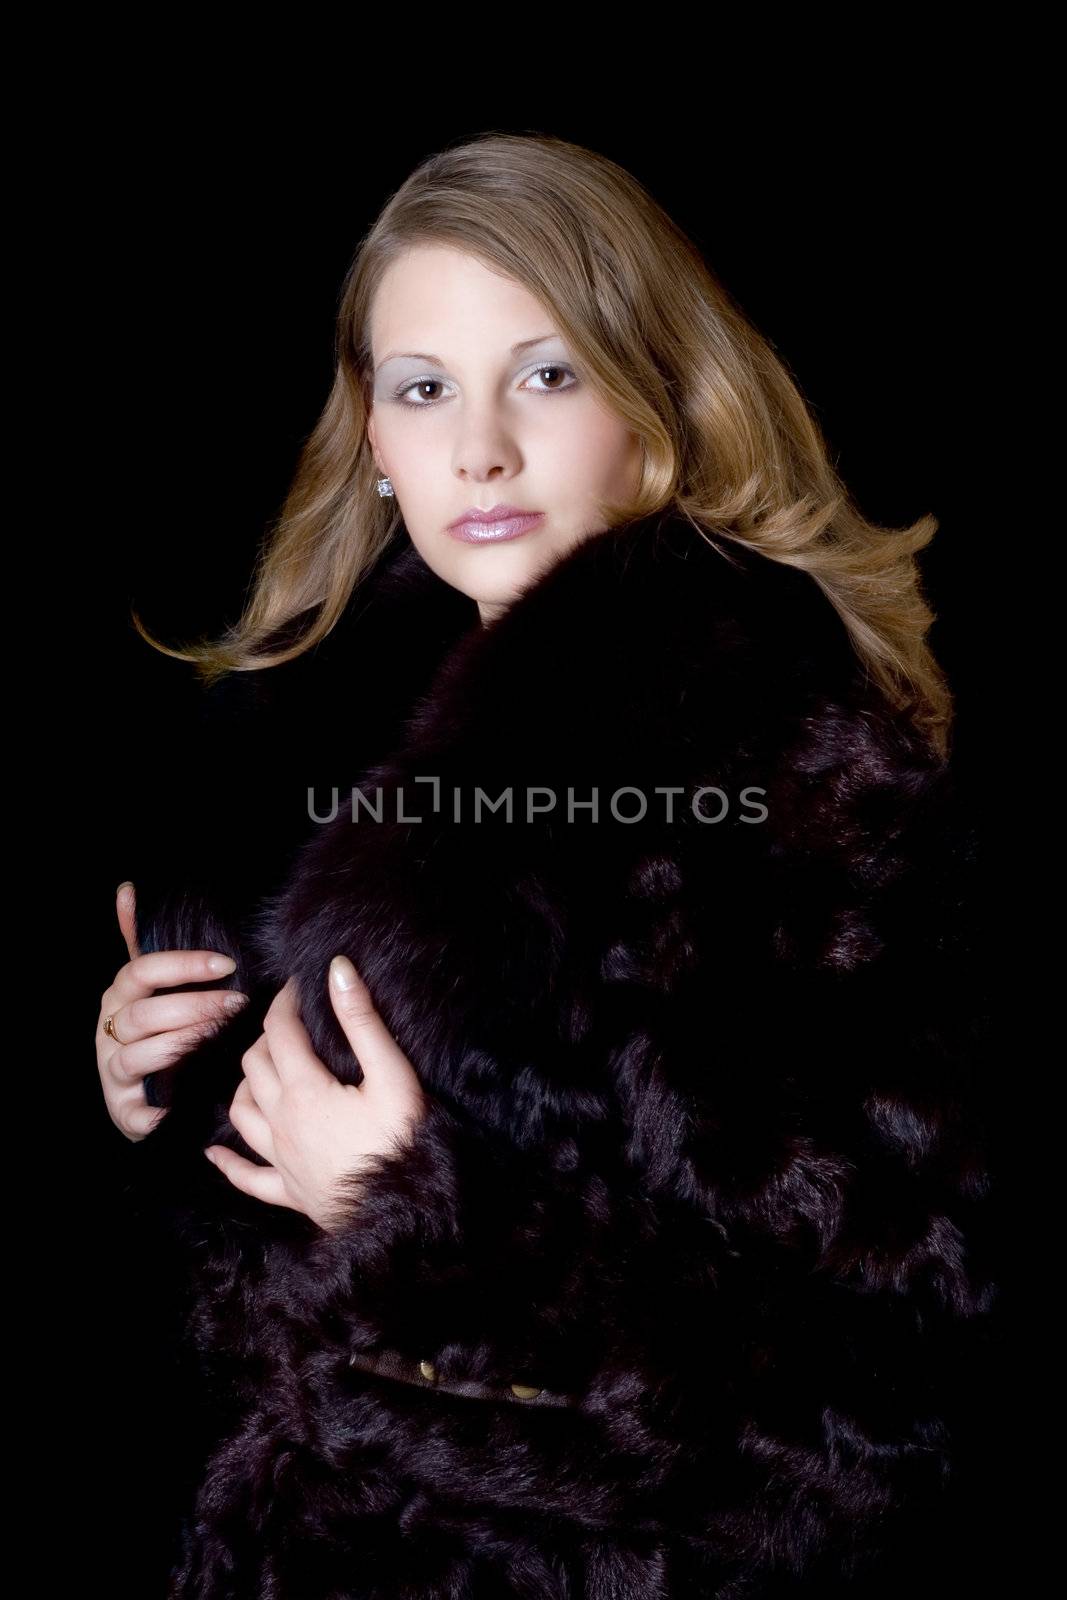 The young beautiful woman in a fur coat by acidgrey